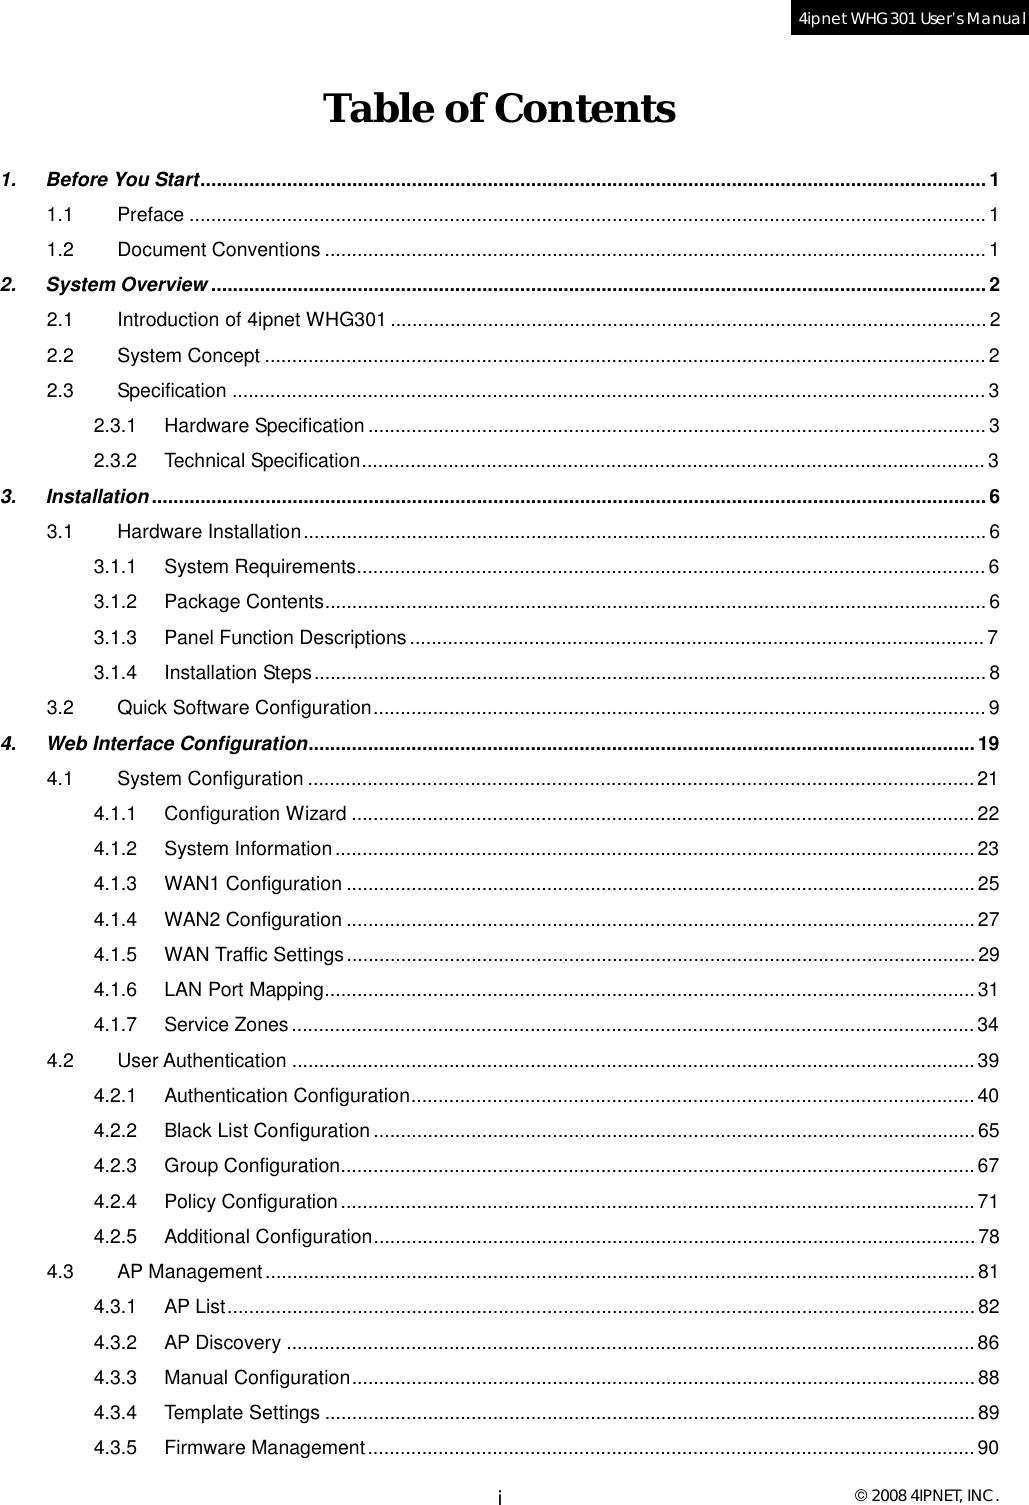  © 2008 4IPNET, INC. i4ipnet WHG301 User’s Manual  Table of Contents 1.   Before You Start.................................................................................................................................................1 1.1 Preface...................................................................................................................................................1 1.2 Document Conventions..........................................................................................................................1 2.   System Overview ...............................................................................................................................................2 2.1 Introduction of 4ipnet WHG301..............................................................................................................2 2.2 System Concept.....................................................................................................................................2 2.3 Specification...........................................................................................................................................3 2.3.1 Hardware Specification..................................................................................................................3 2.3.2 Technical Specification...................................................................................................................3 3.   Installation..........................................................................................................................................................6 3.1 Hardware Installation..............................................................................................................................6 3.1.1 System Requirements....................................................................................................................6 3.1.2 Package Contents..........................................................................................................................6 3.1.3 Panel Function Descriptions..........................................................................................................7 3.1.4 Installation Steps............................................................................................................................8 3.2 Quick Software Configuration.................................................................................................................9 4.   Web Interface Configuration...........................................................................................................................19 4.1 System Configuration...........................................................................................................................21 4.1.1 Configuration Wizard...................................................................................................................22 4.1.2 System Information......................................................................................................................23 4.1.3 WAN1 Configuration....................................................................................................................25 4.1.4 WAN2 Configuration....................................................................................................................27 4.1.5 WAN Traffic Settings....................................................................................................................29 4.1.6 LAN Port Mapping........................................................................................................................31 4.1.7 Service Zones..............................................................................................................................34 4.2 User Authentication..............................................................................................................................39 4.2.1 Authentication Configuration........................................................................................................40 4.2.2 Black List Configuration...............................................................................................................65 4.2.3 Group Configuration.....................................................................................................................67 4.2.4 Policy Configuration.....................................................................................................................71 4.2.5 Additional Configuration...............................................................................................................78 4.3 AP Management...................................................................................................................................81 4.3.1 AP List..........................................................................................................................................82 4.3.2 AP Discovery...............................................................................................................................86 4.3.3 Manual Configuration...................................................................................................................88 4.3.4 Template Settings........................................................................................................................89 4.3.5 Firmware Management................................................................................................................90 